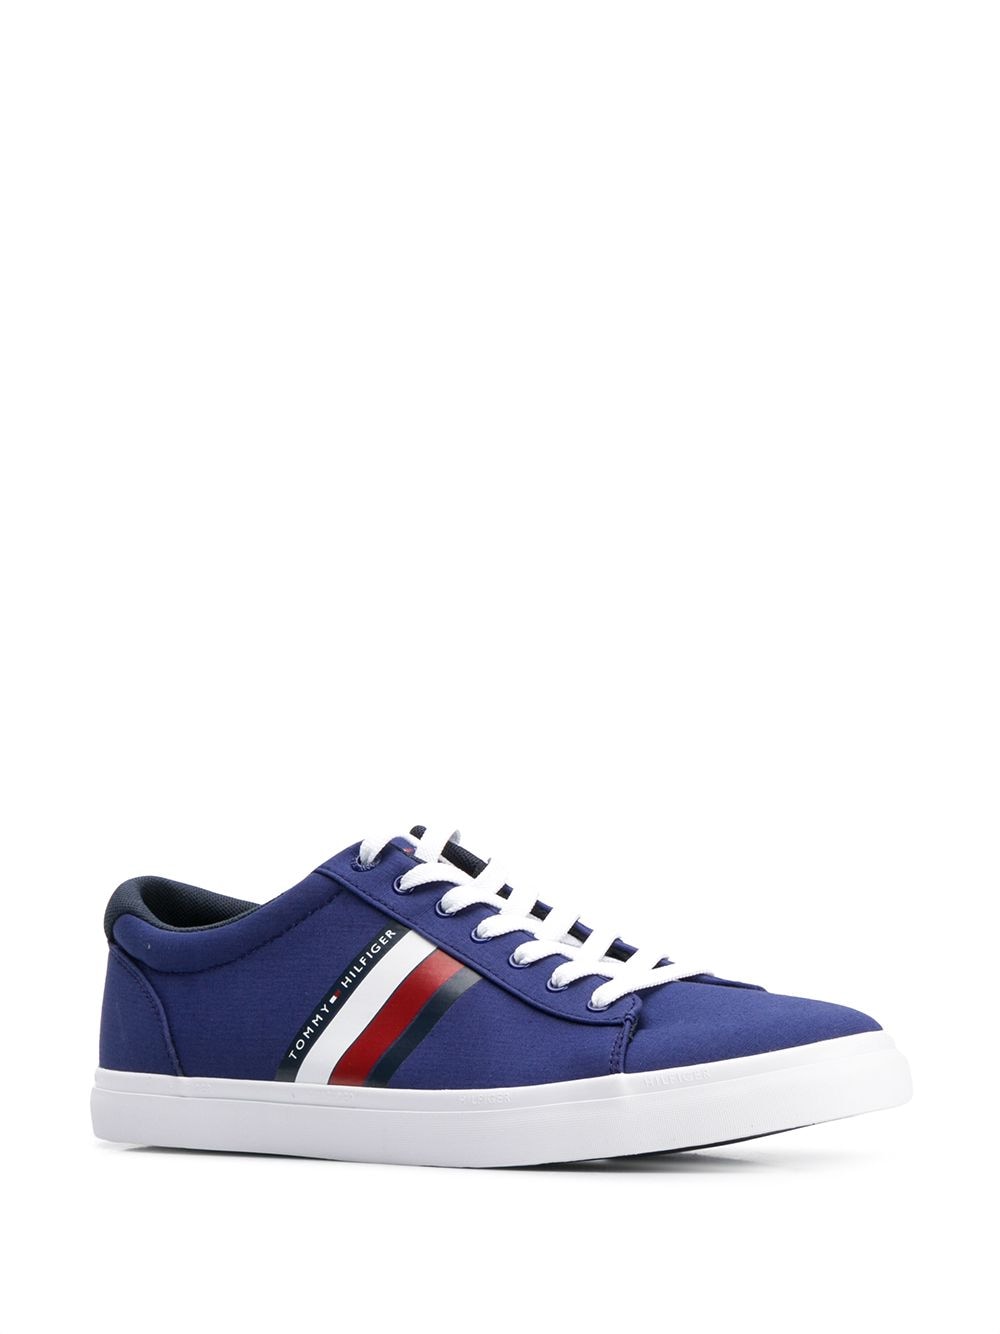 Tommy Hilfiger Signature Strip Sneakers - Farfetch